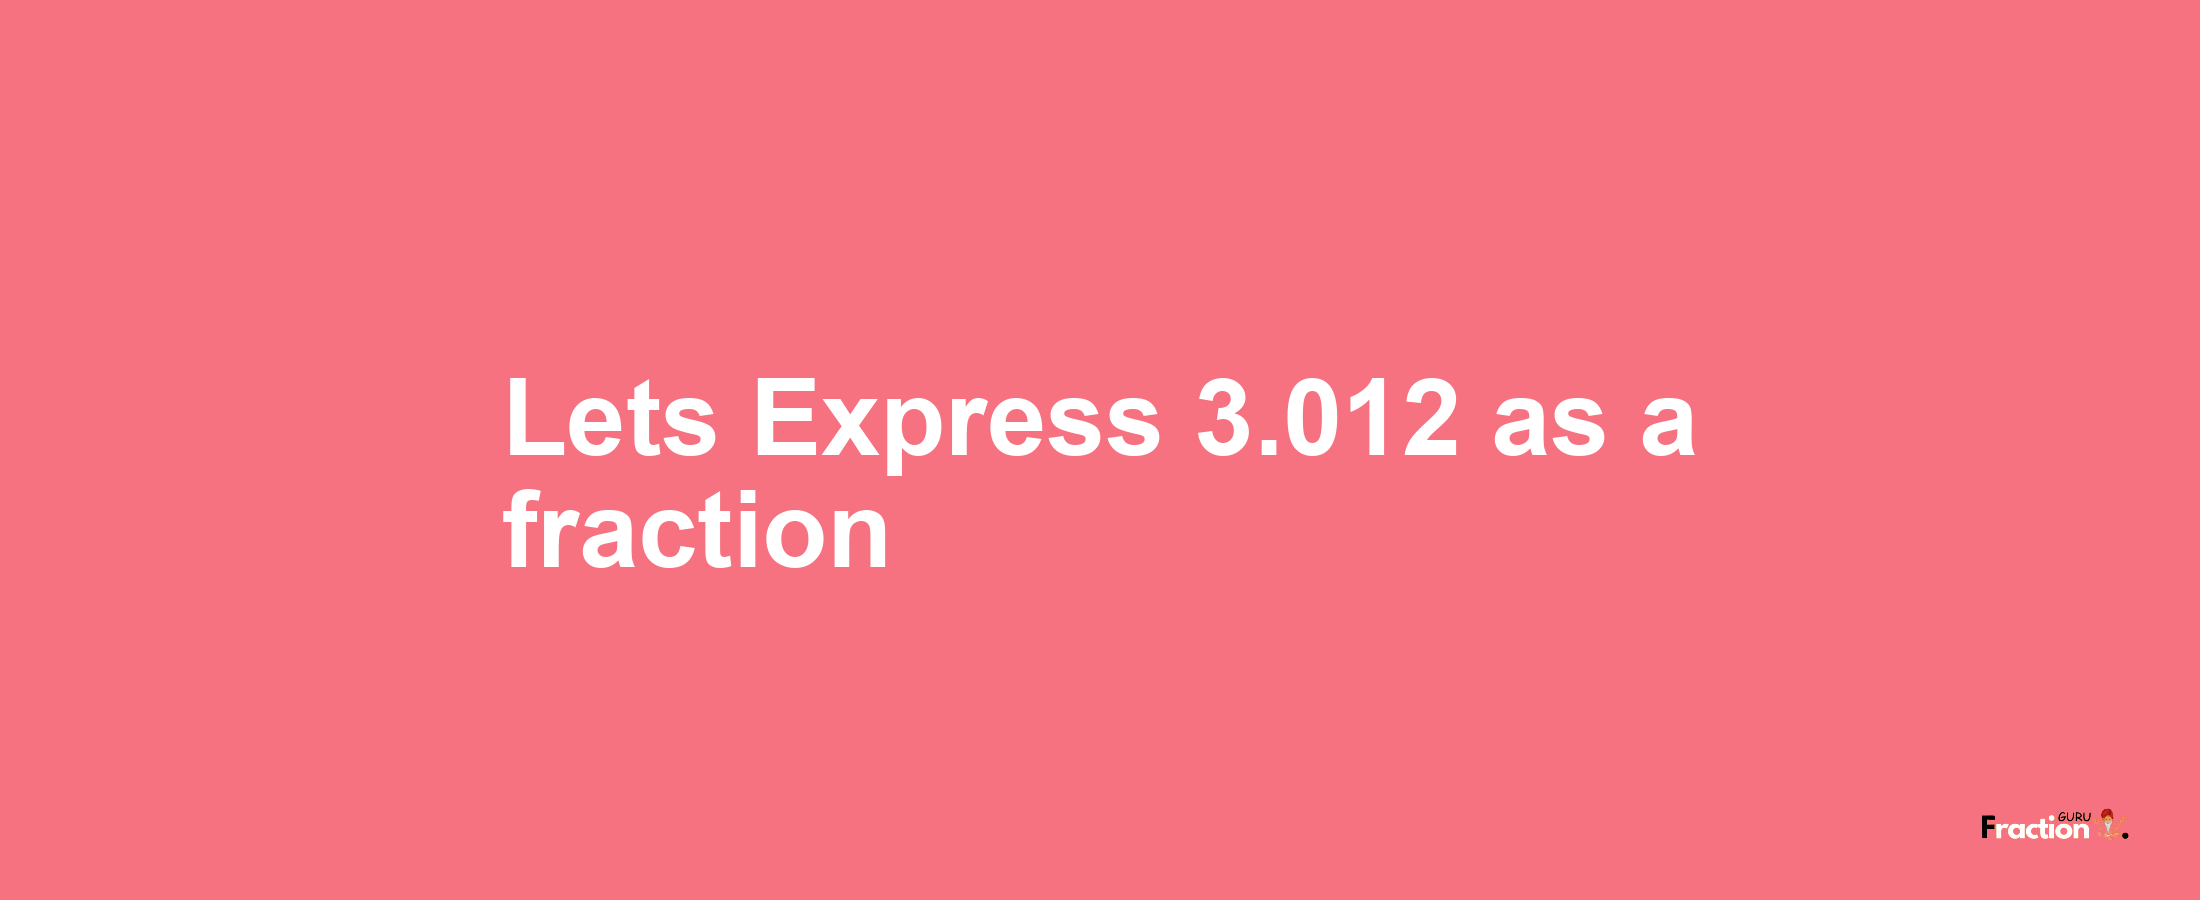 Lets Express 3.012 as afraction